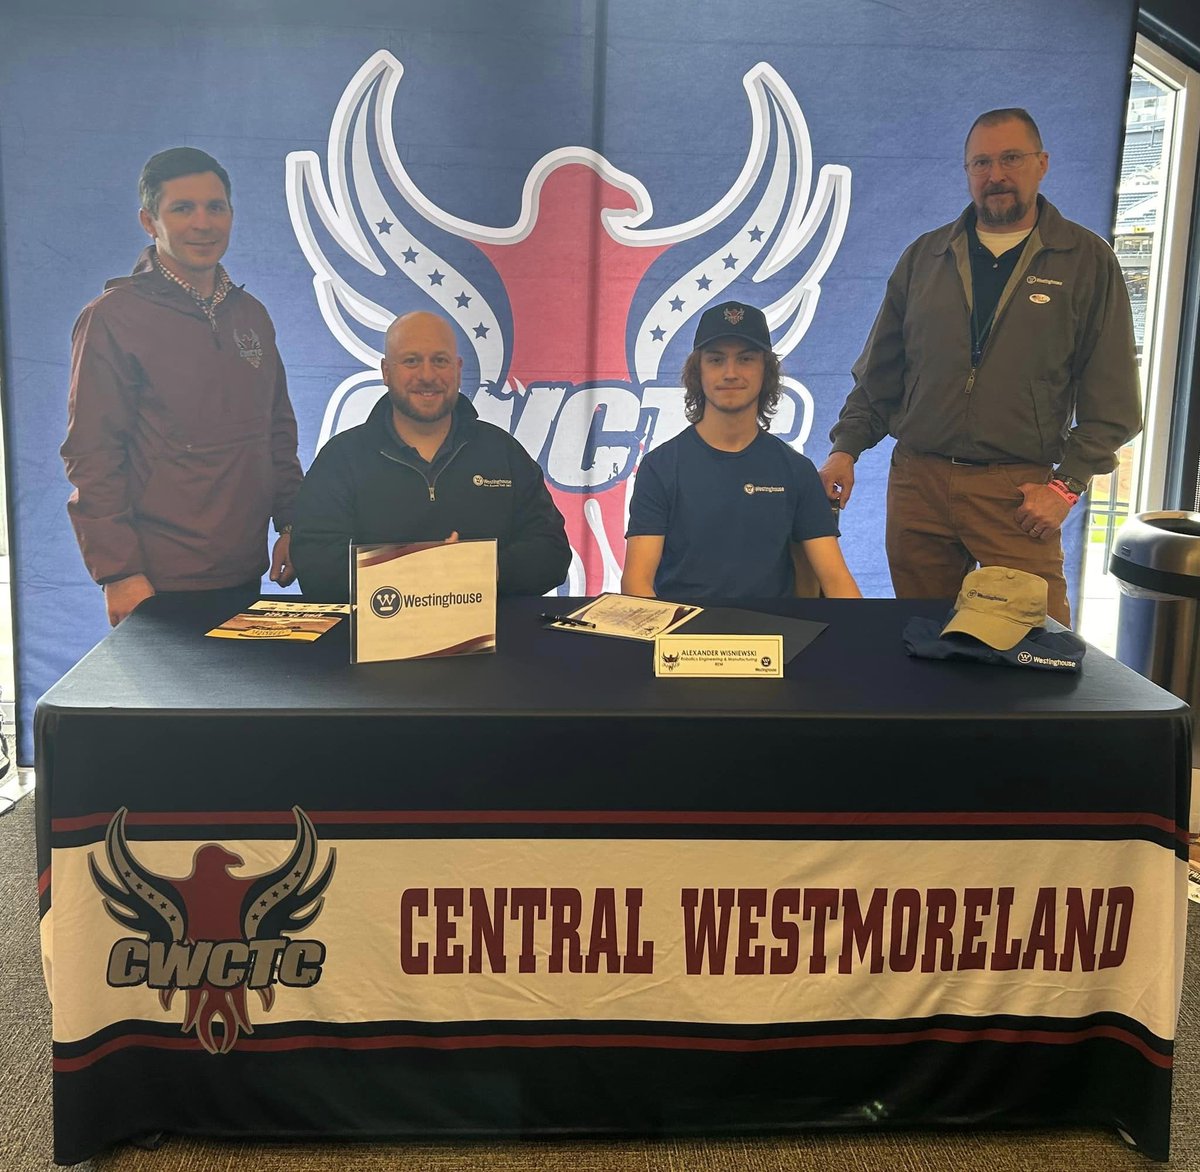 Last night, Central Westmoreland Career and Technology Center in Pa. held a signing event at @PiratesPNC for students starting jobs after graduation. One of those students, Alex Wisniewski, will join Westinghouse to help build a #CleanEnergy future. Welcome to the team, Alex!